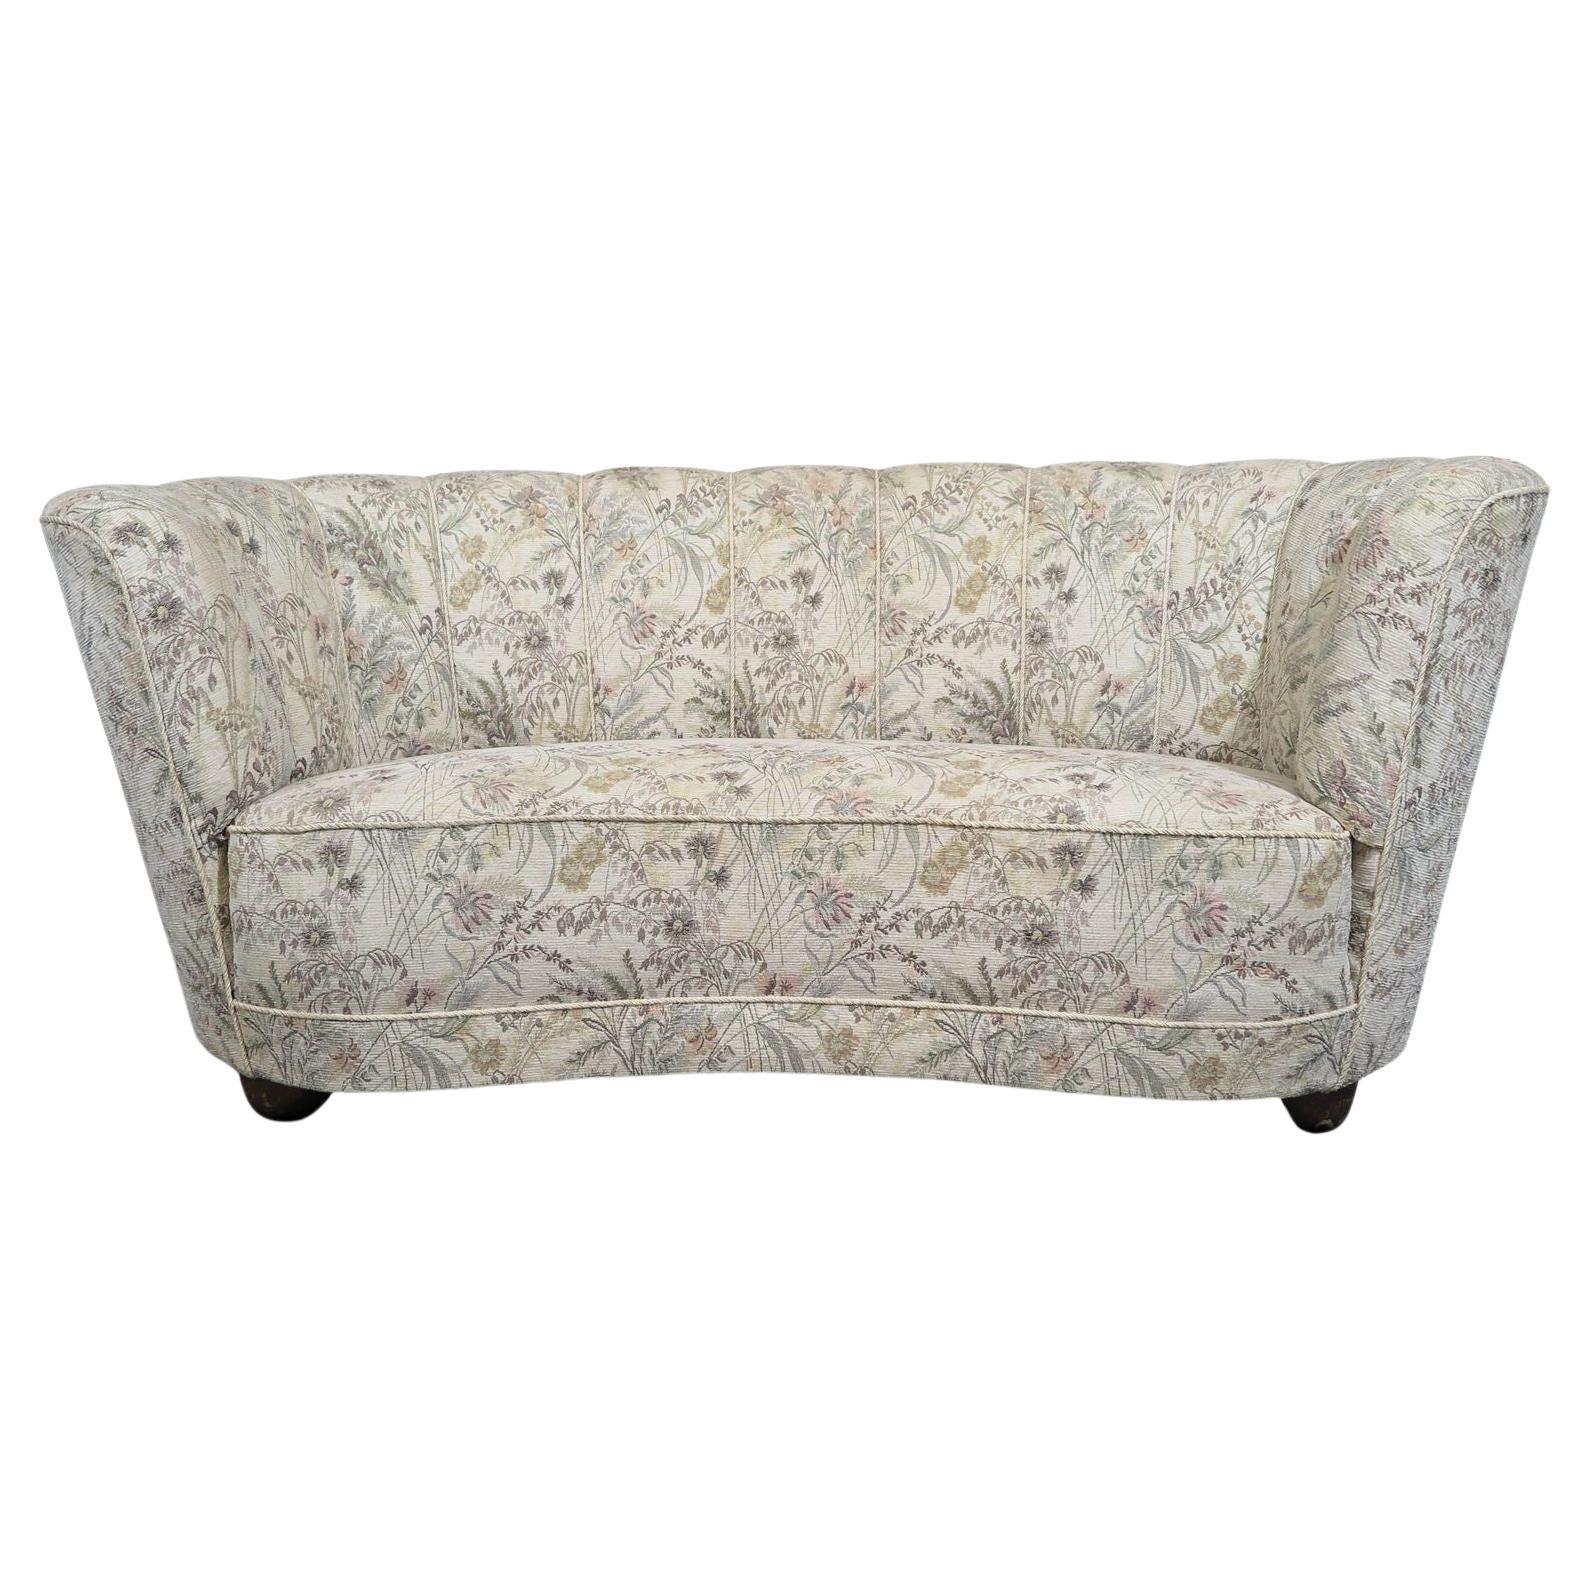 1930's Danish Deco Sofa in Original Fabric for Reupholstery For Sale